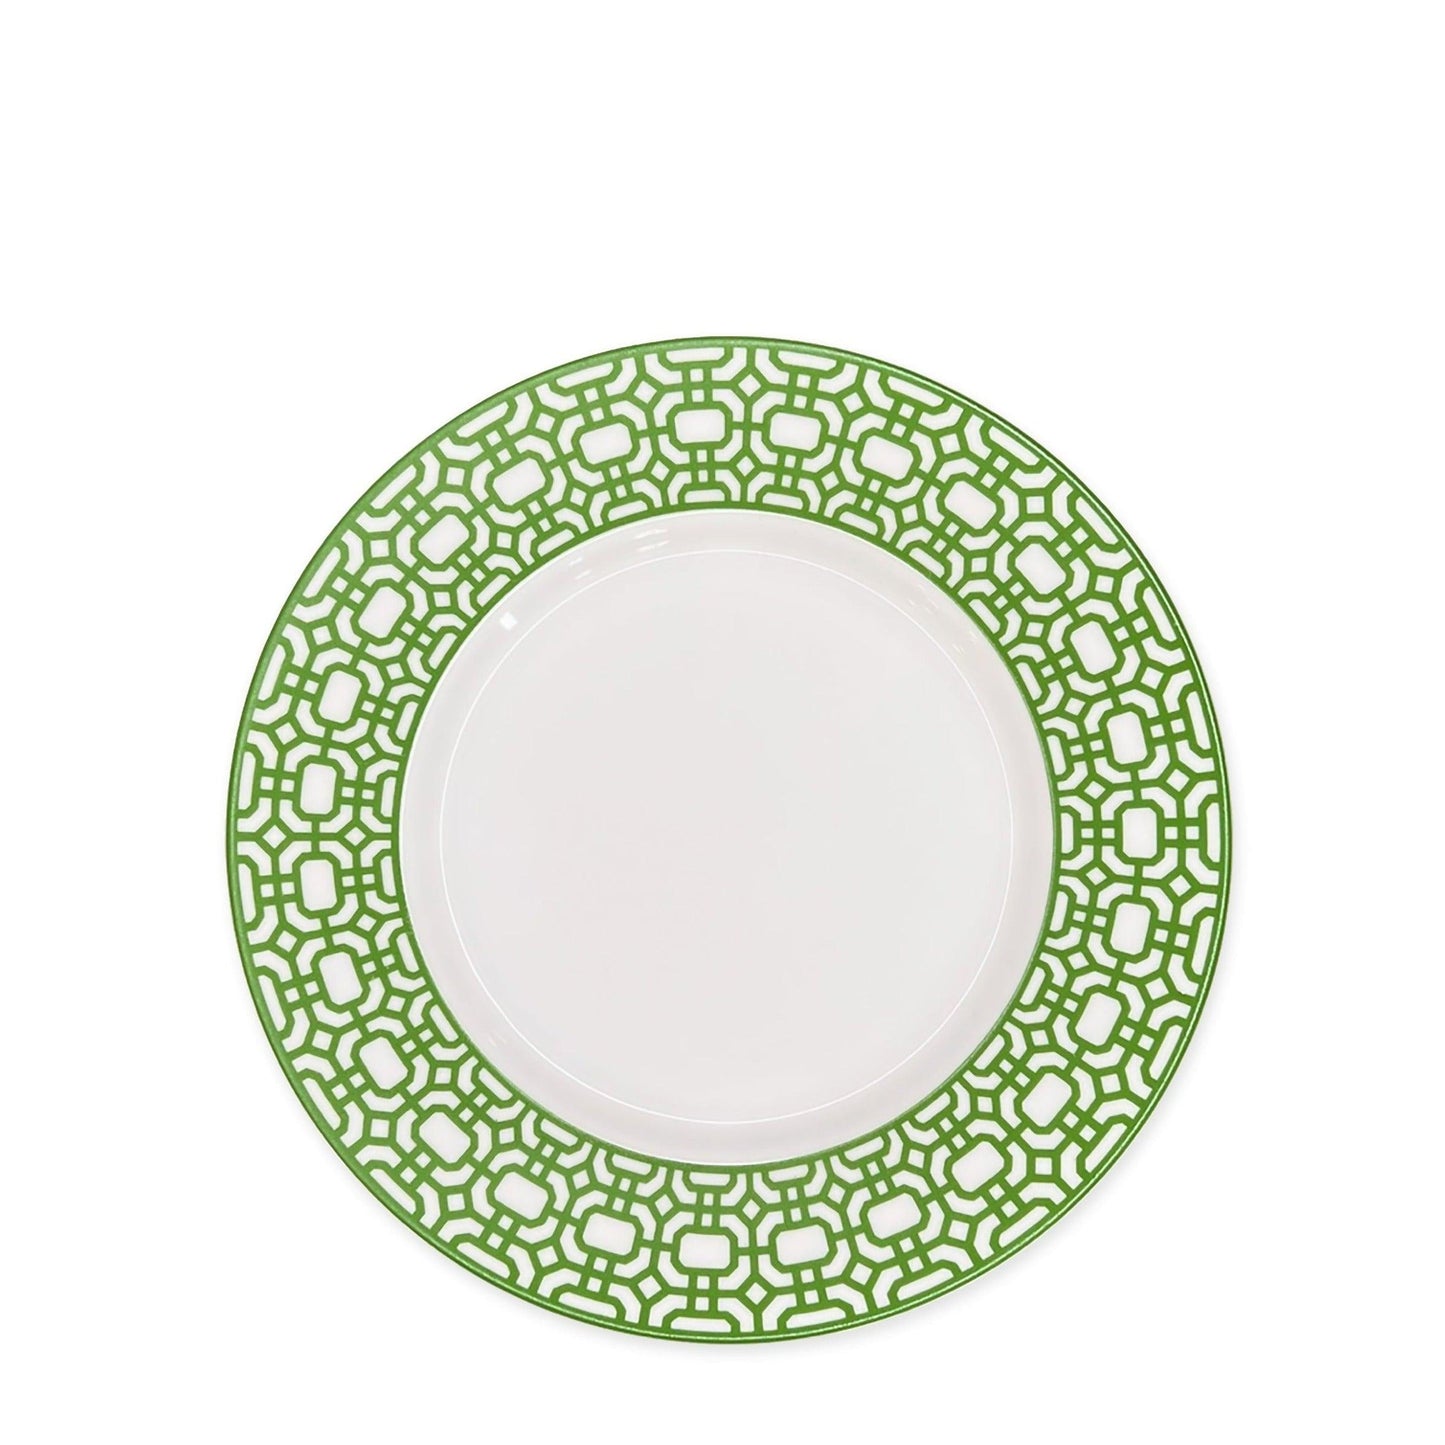 a green and white plate on a white background